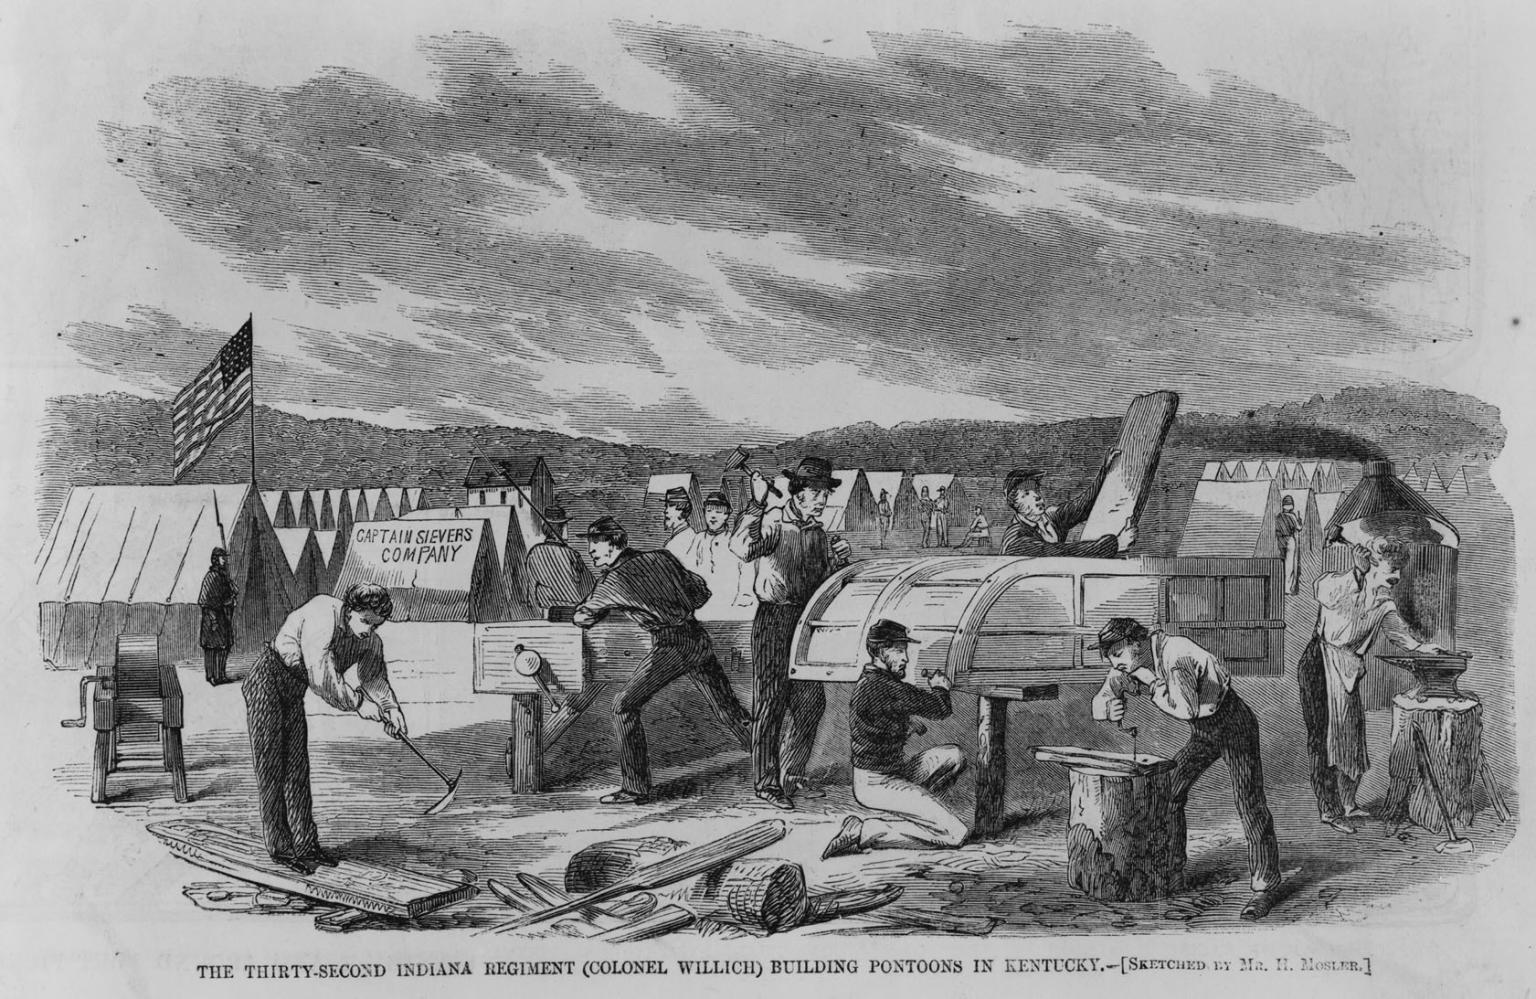 Drawing depicting men building vehicle at a campsite and English caption.